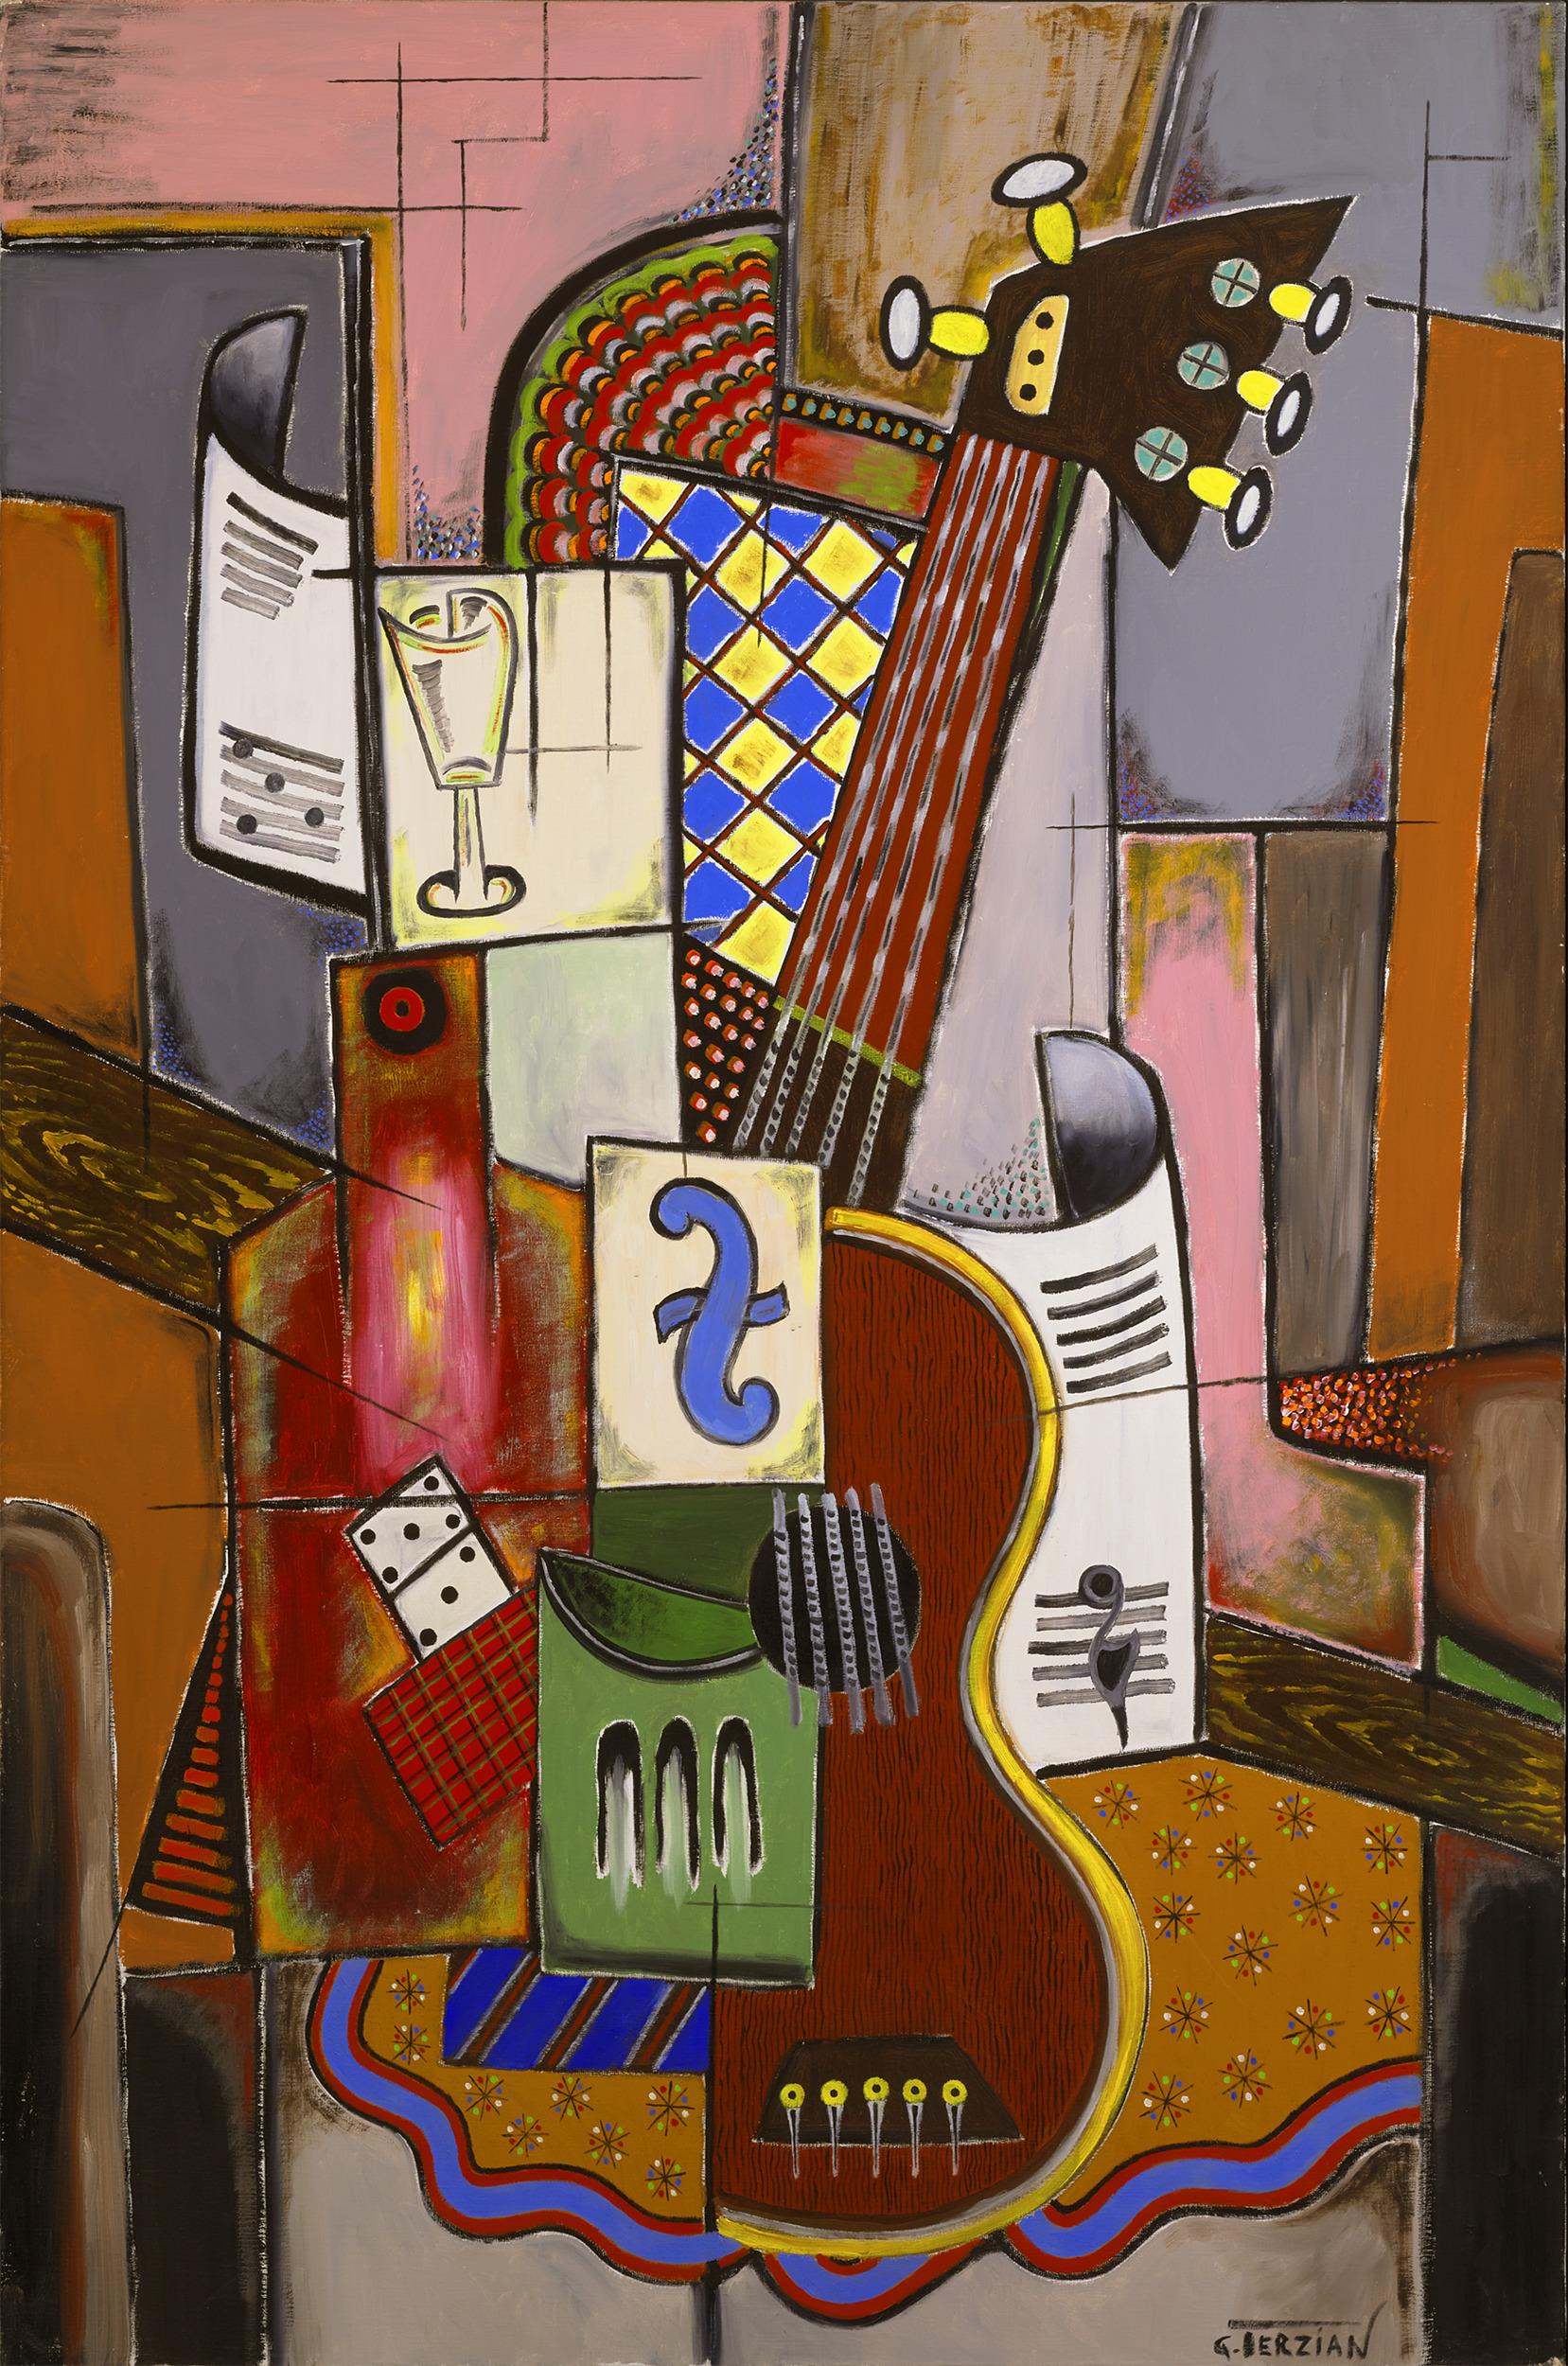 Georges Terzian
1939-2021  French

La guitare au domino

Signed “G.TERZIAN” (lower right); signed, titled and dated “GEORGES TERZIAN LA GUITARE AU DOMINO 2012” (en verso)
Oil on canvas

Visually stimulating and skillfully executed, this original